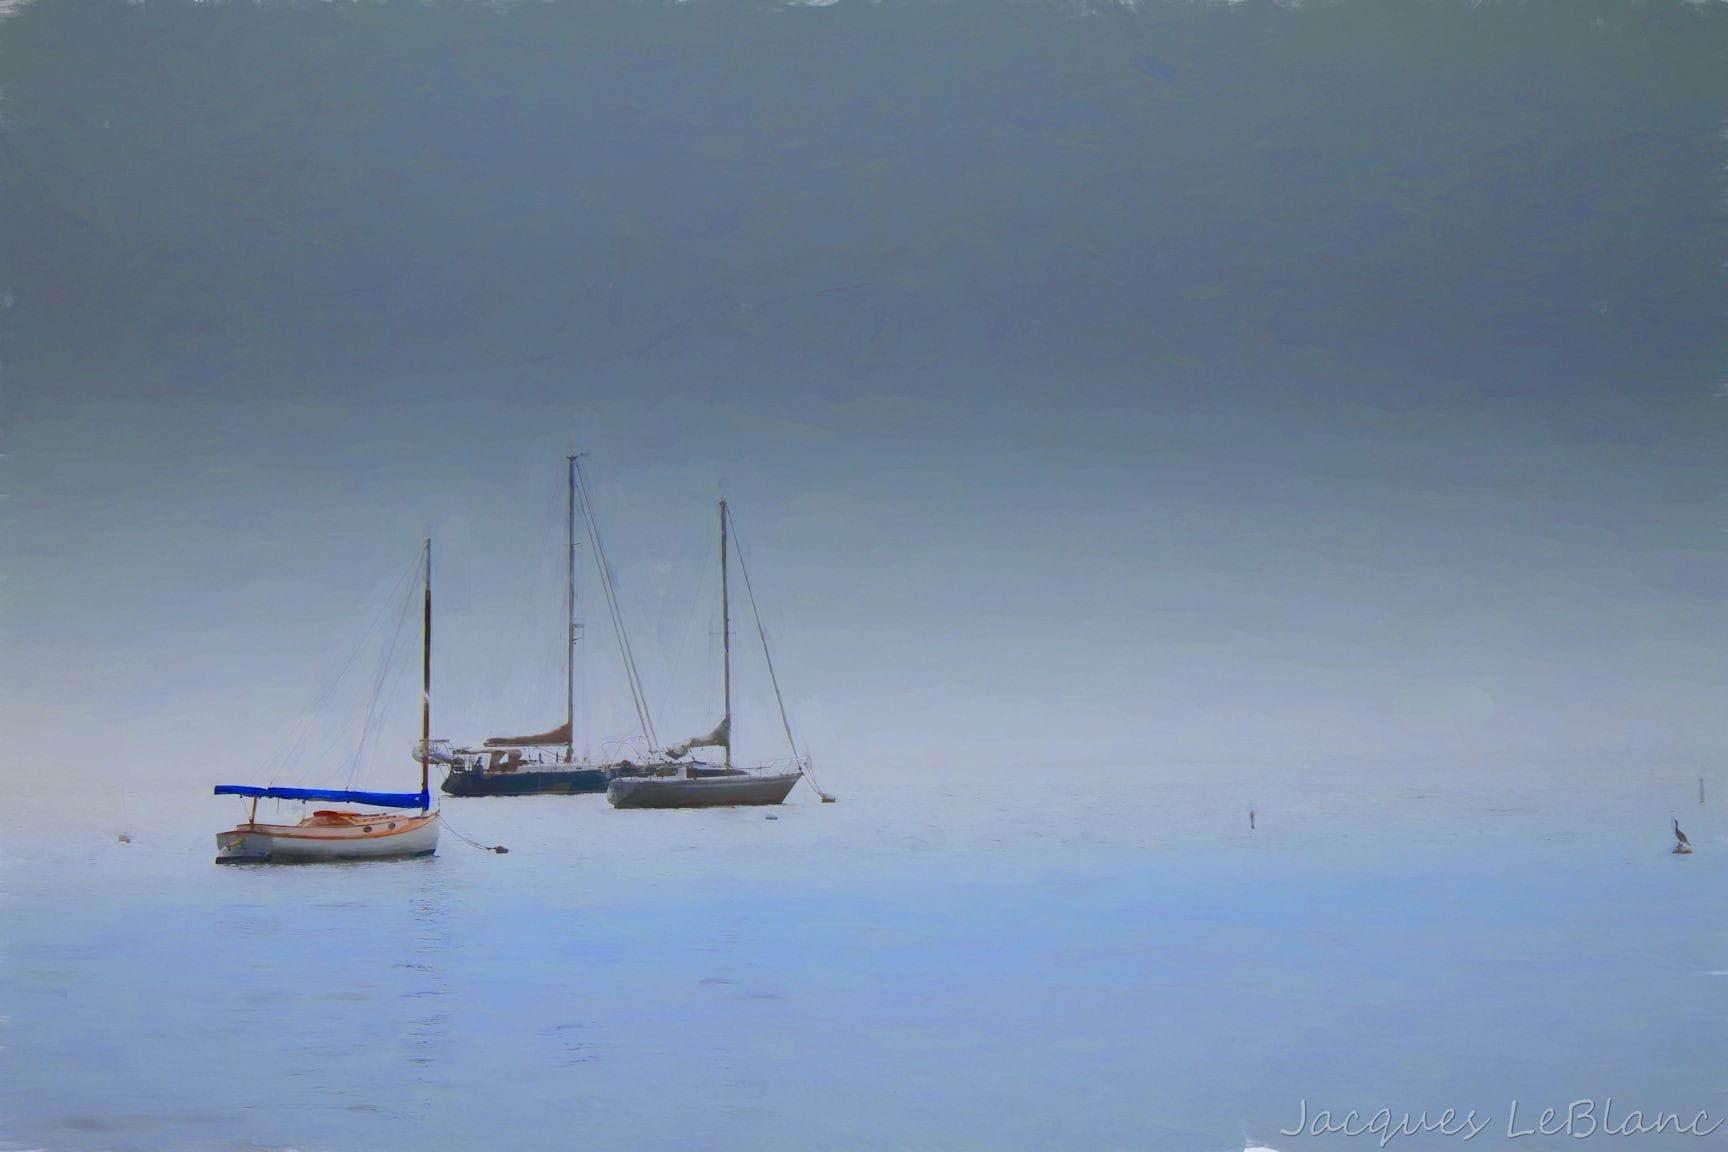 This group of sailboats enshrouded in dense fog appears to be floating in space while anchored in Bellport Bay this early September morning.